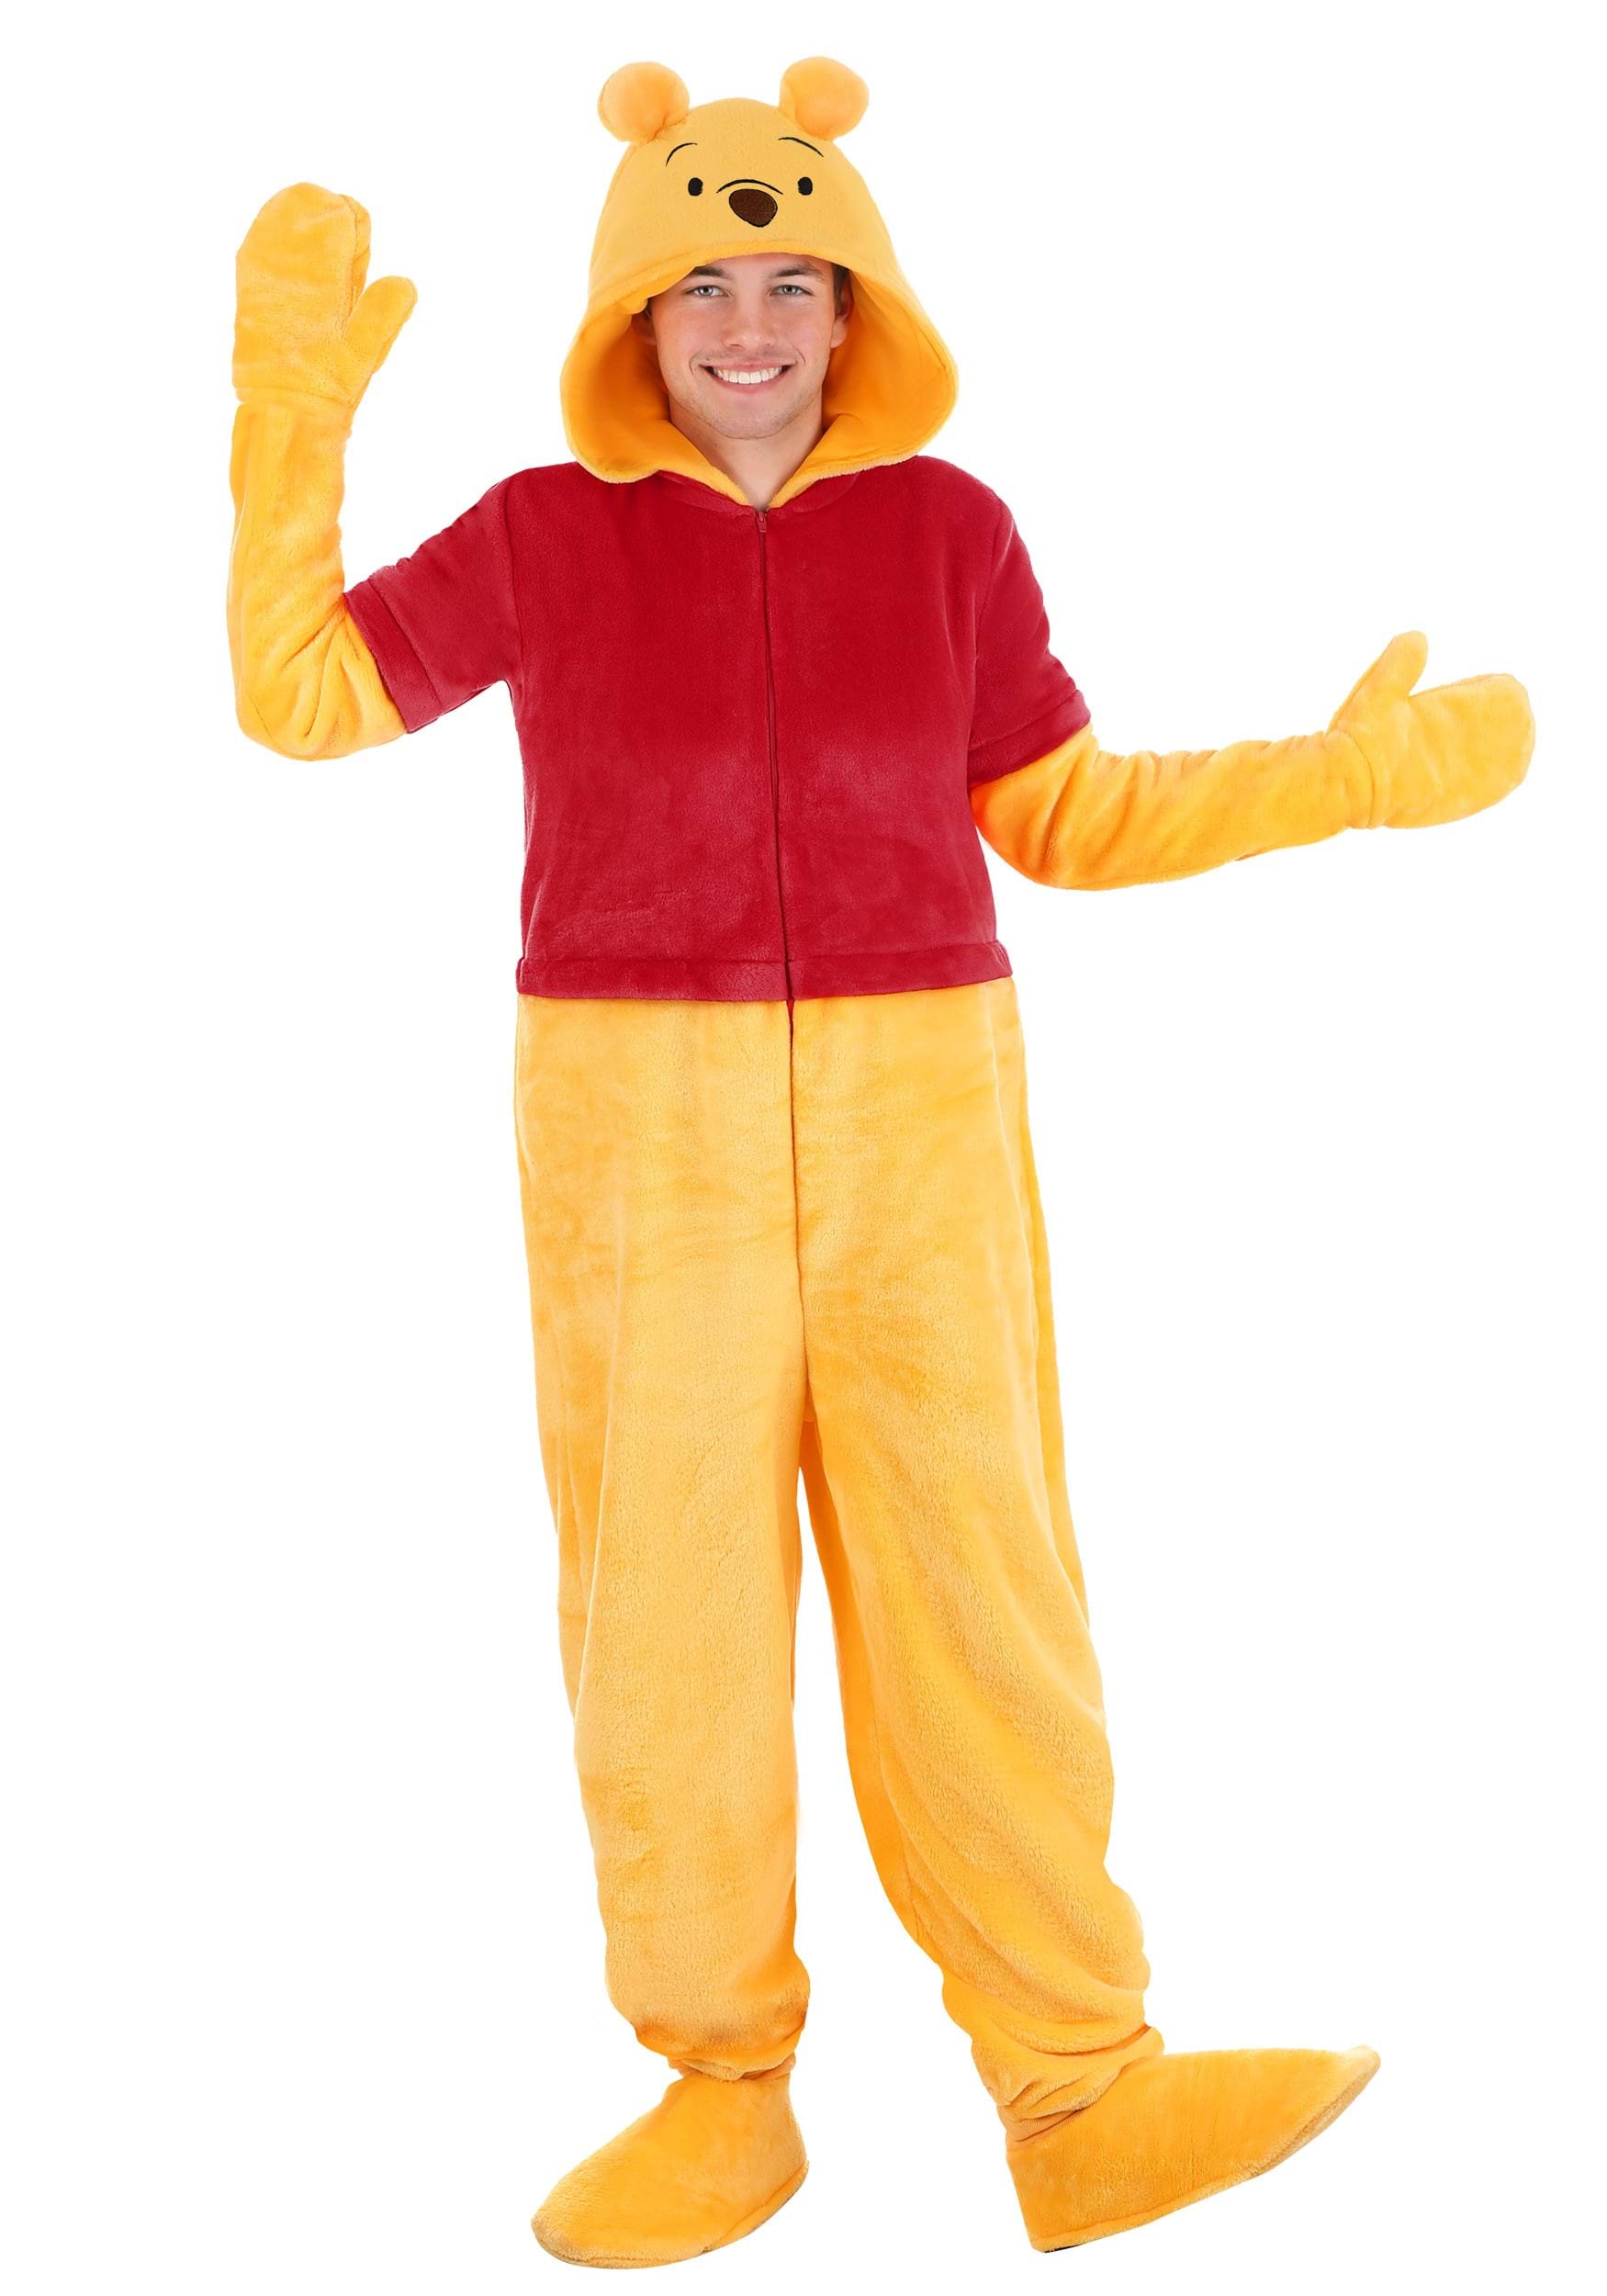 Image of Adult Deluxe Disney Winnie the Pooh Costume ID FUN4712AD-M